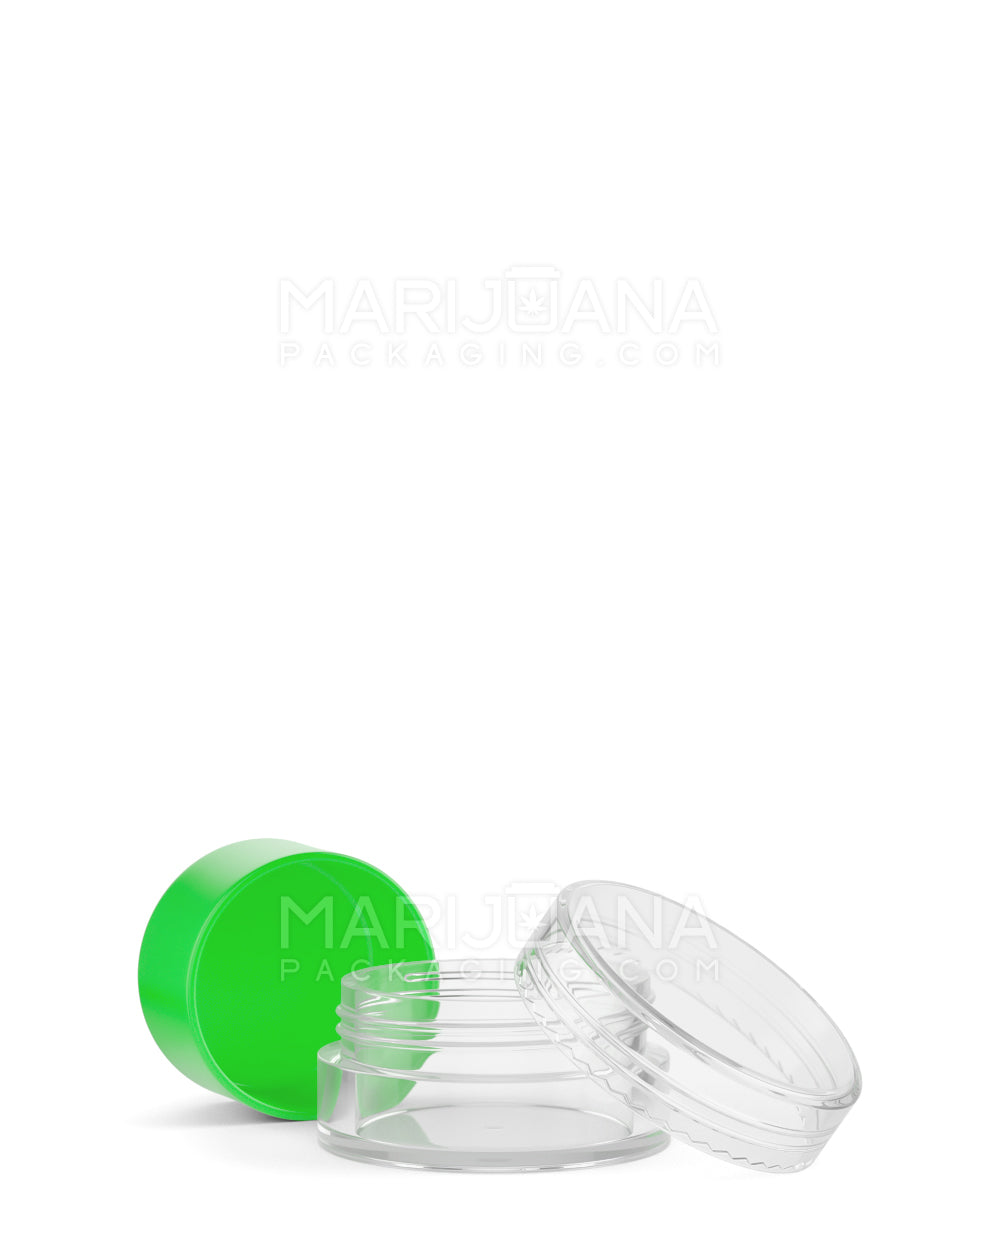 Clear Concentrate Containers w/ Screw Top Cap & Green Silicone Insert | 5mL - Plastic - 100 Count - 4